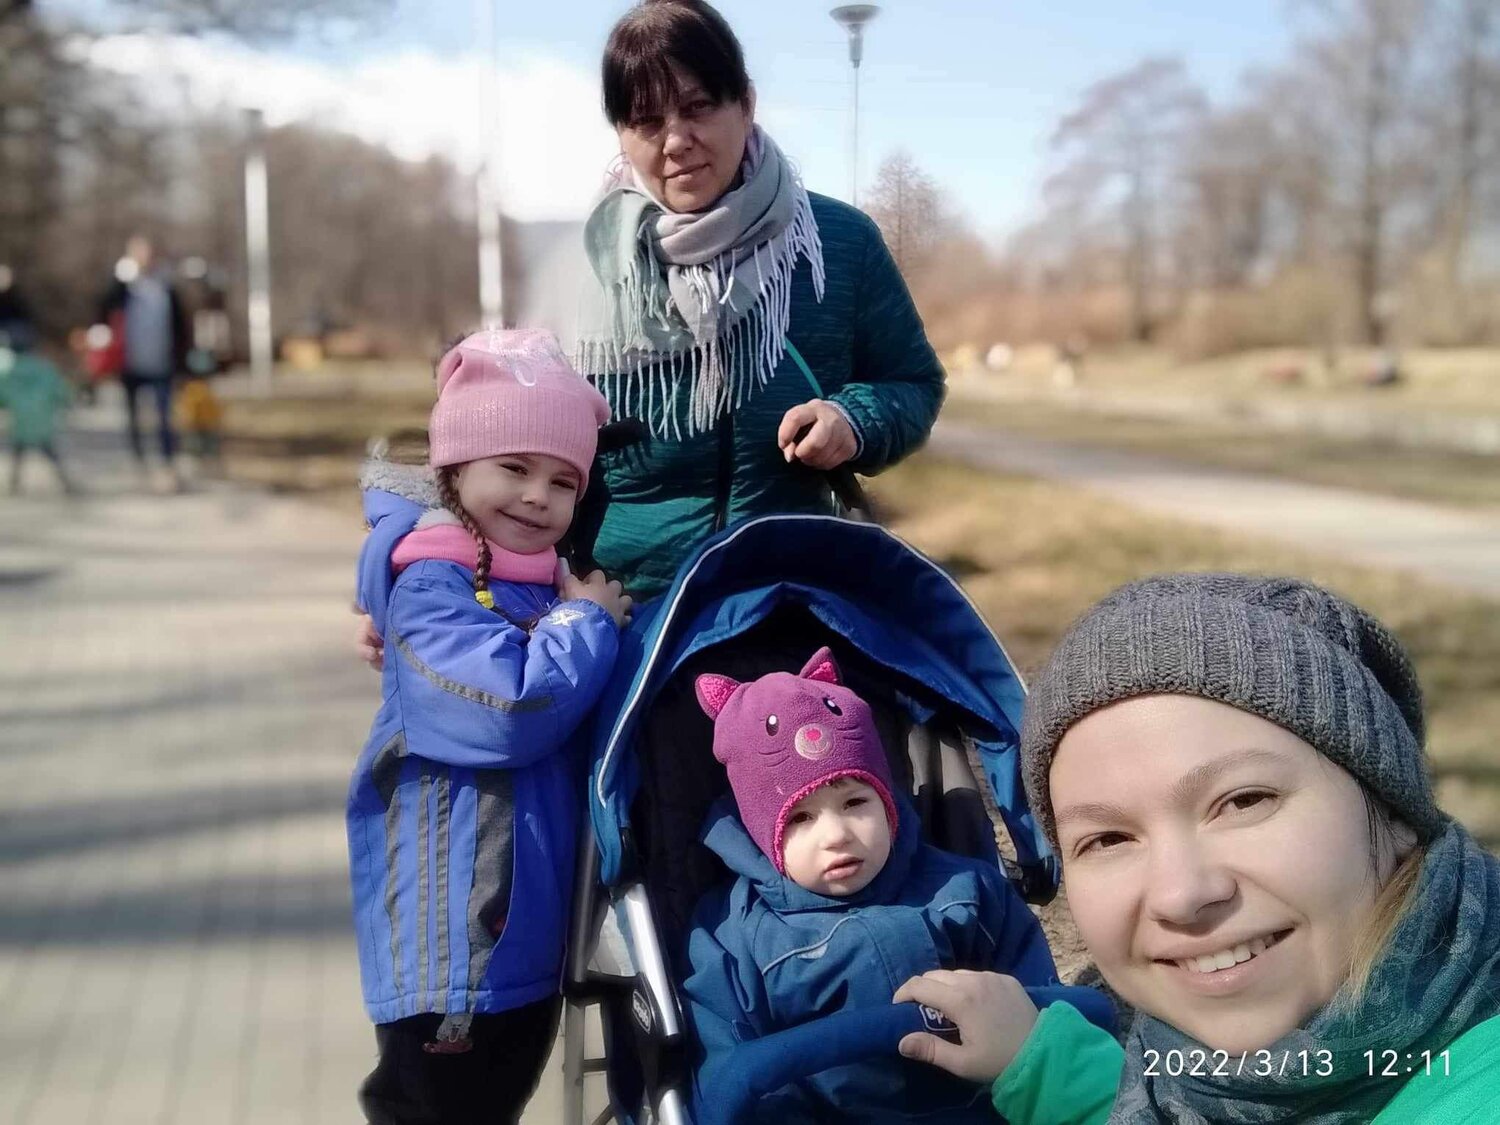 Valentyna Benson spent several weeks in Poland with her daughter, Katja, and two granddaughters after fleeing Ukraine. The men in their family stayed behind to defend their country against the Russians.